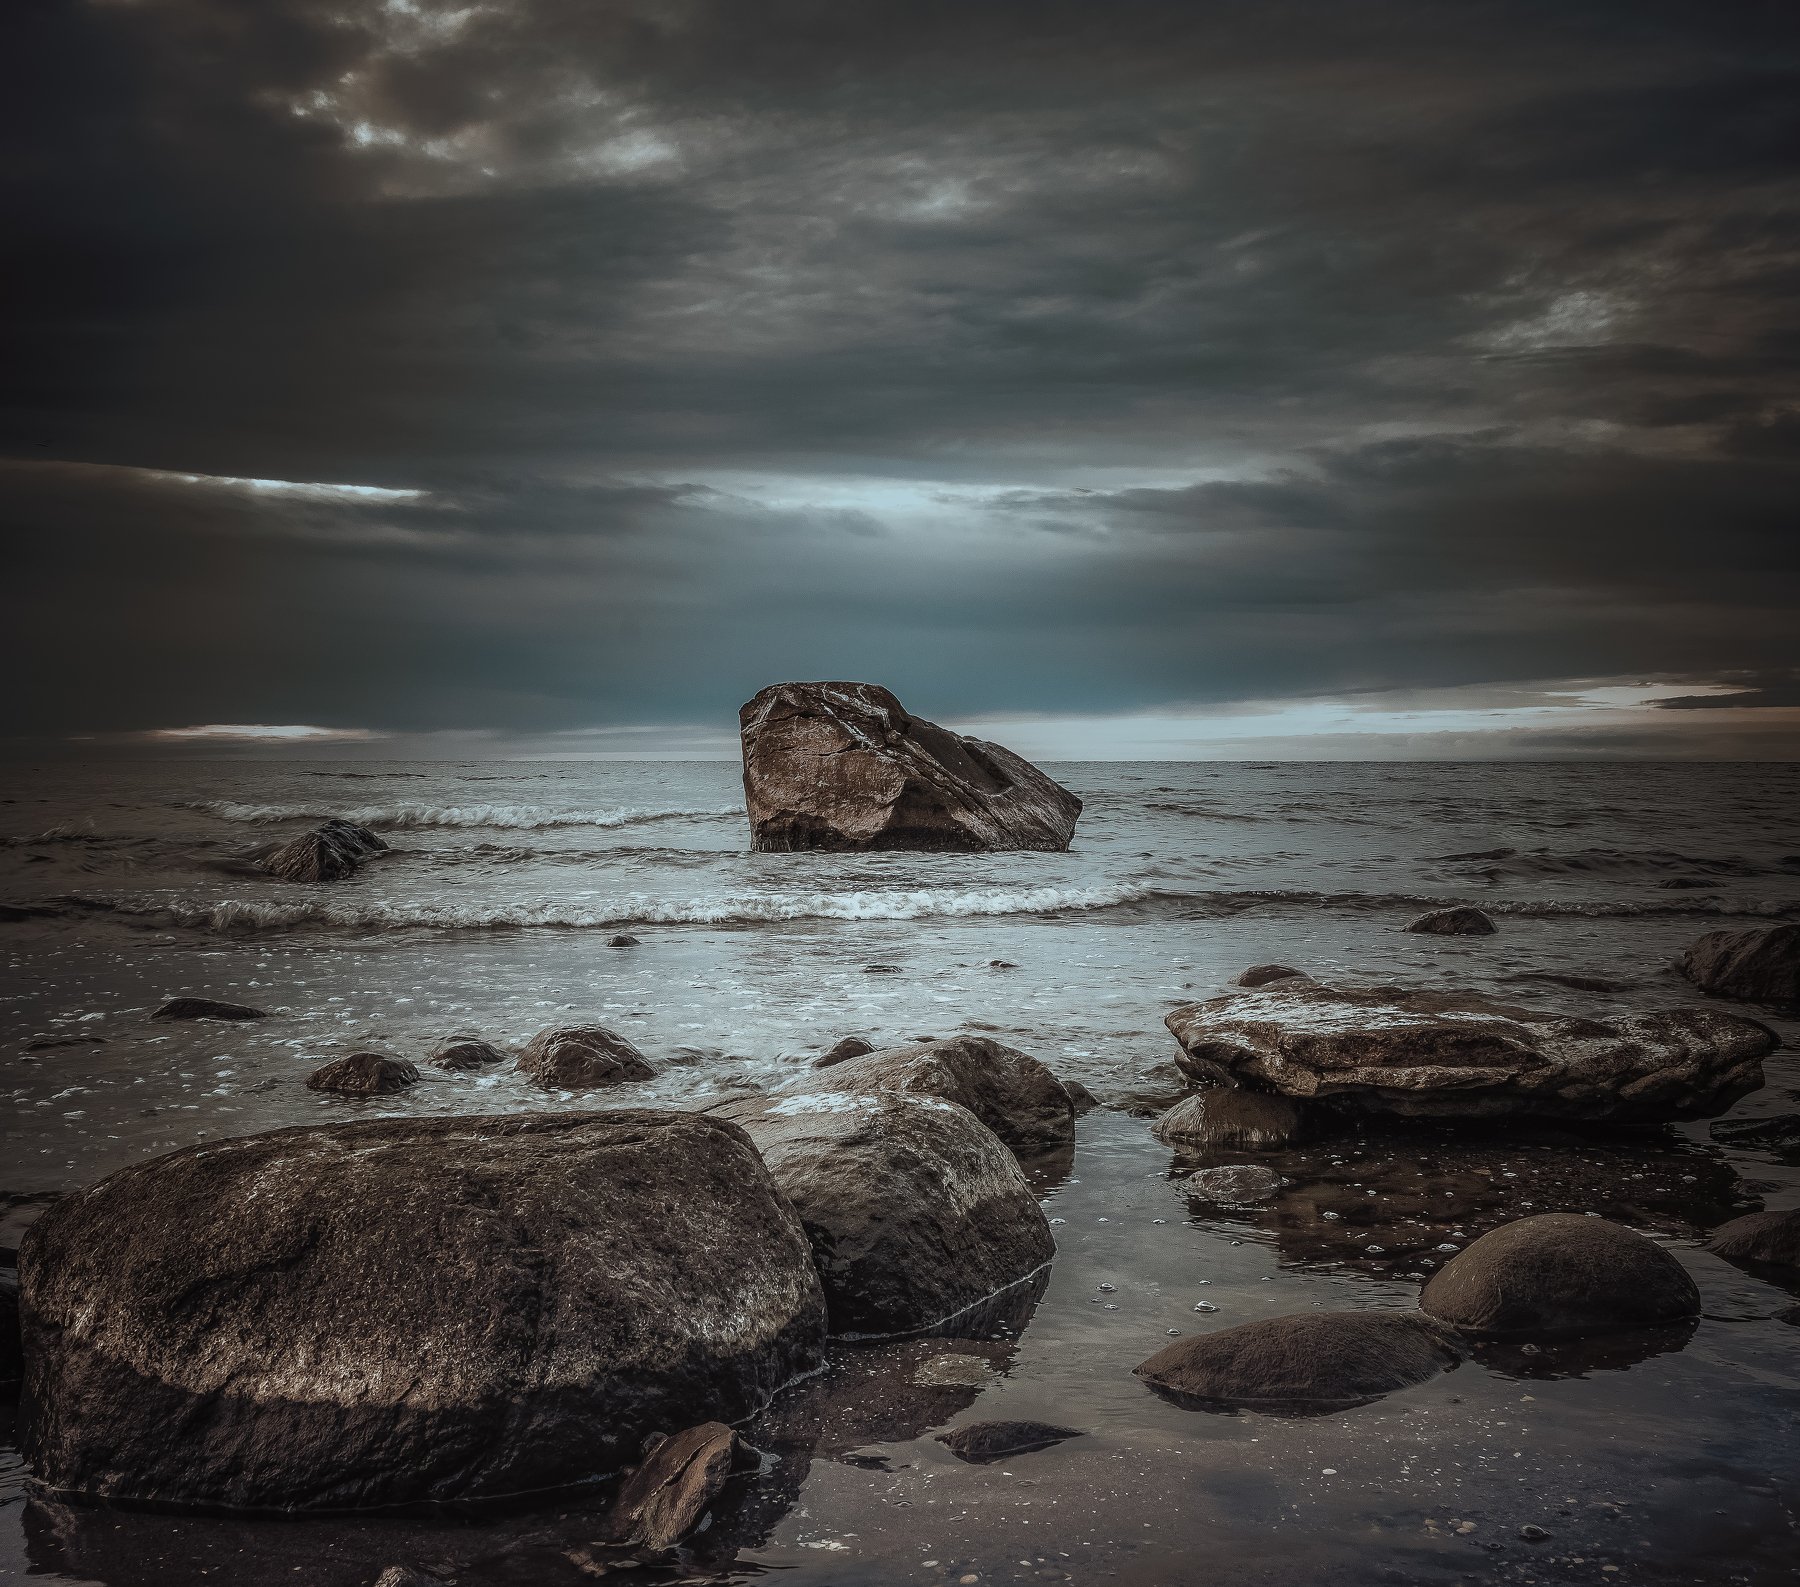 stones  sea  nature  landscape  summer  sky  clouds  baltic  nikon  Dramatic Sky  Scenics  Beauty In Nature  Outdoors, Krzysztof Tollas